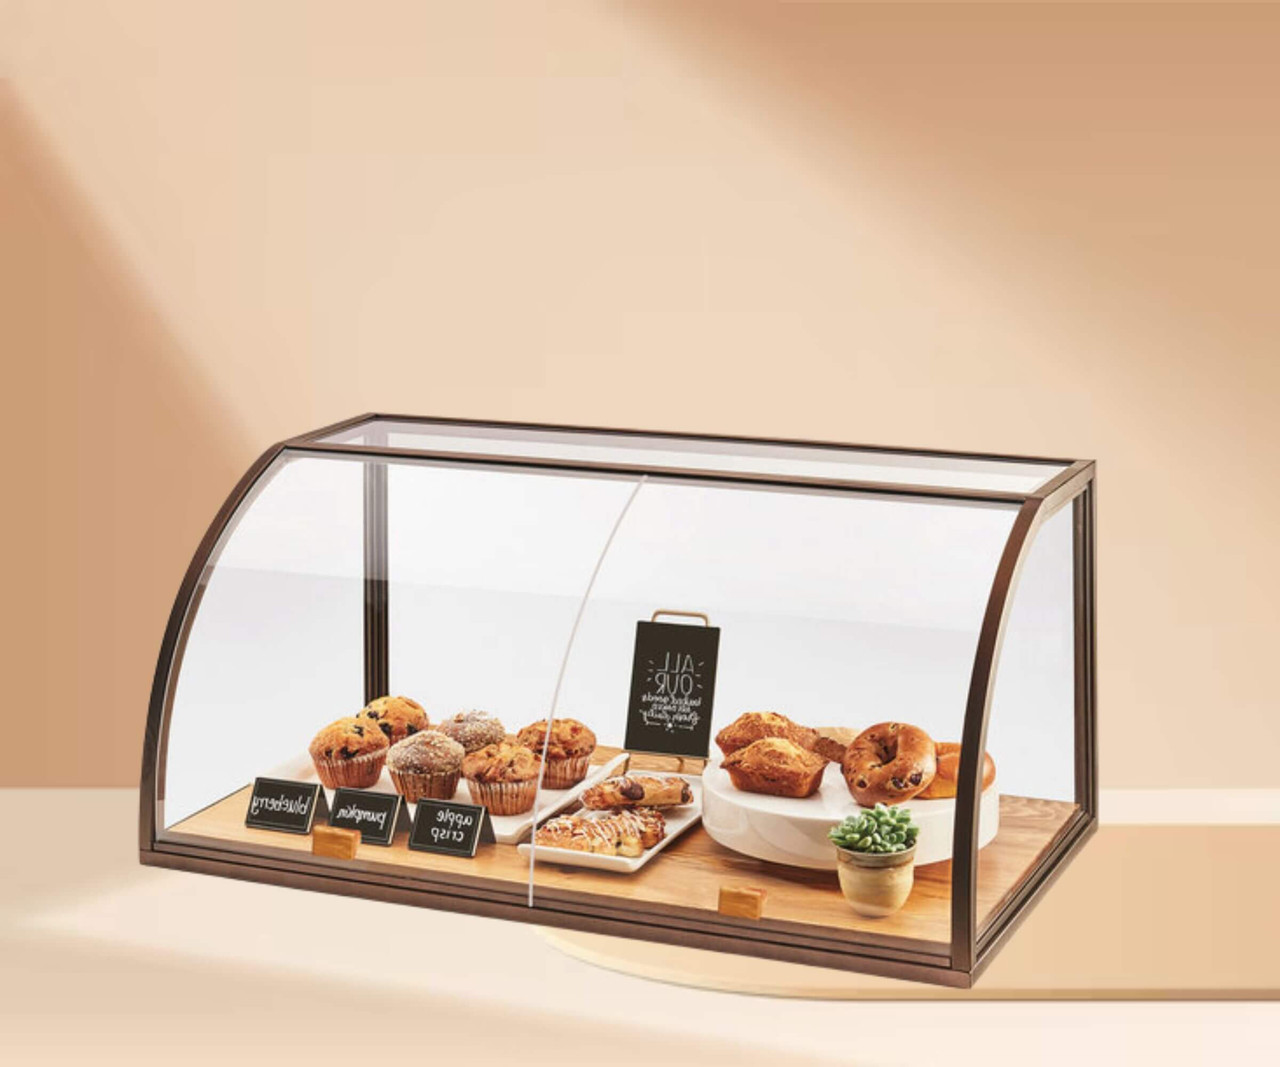 Cal-Mil 36" x 19 1/2" x 17 1/4" Sierra Arched Sliding Door Bakery Display Case-Chicken Pieces